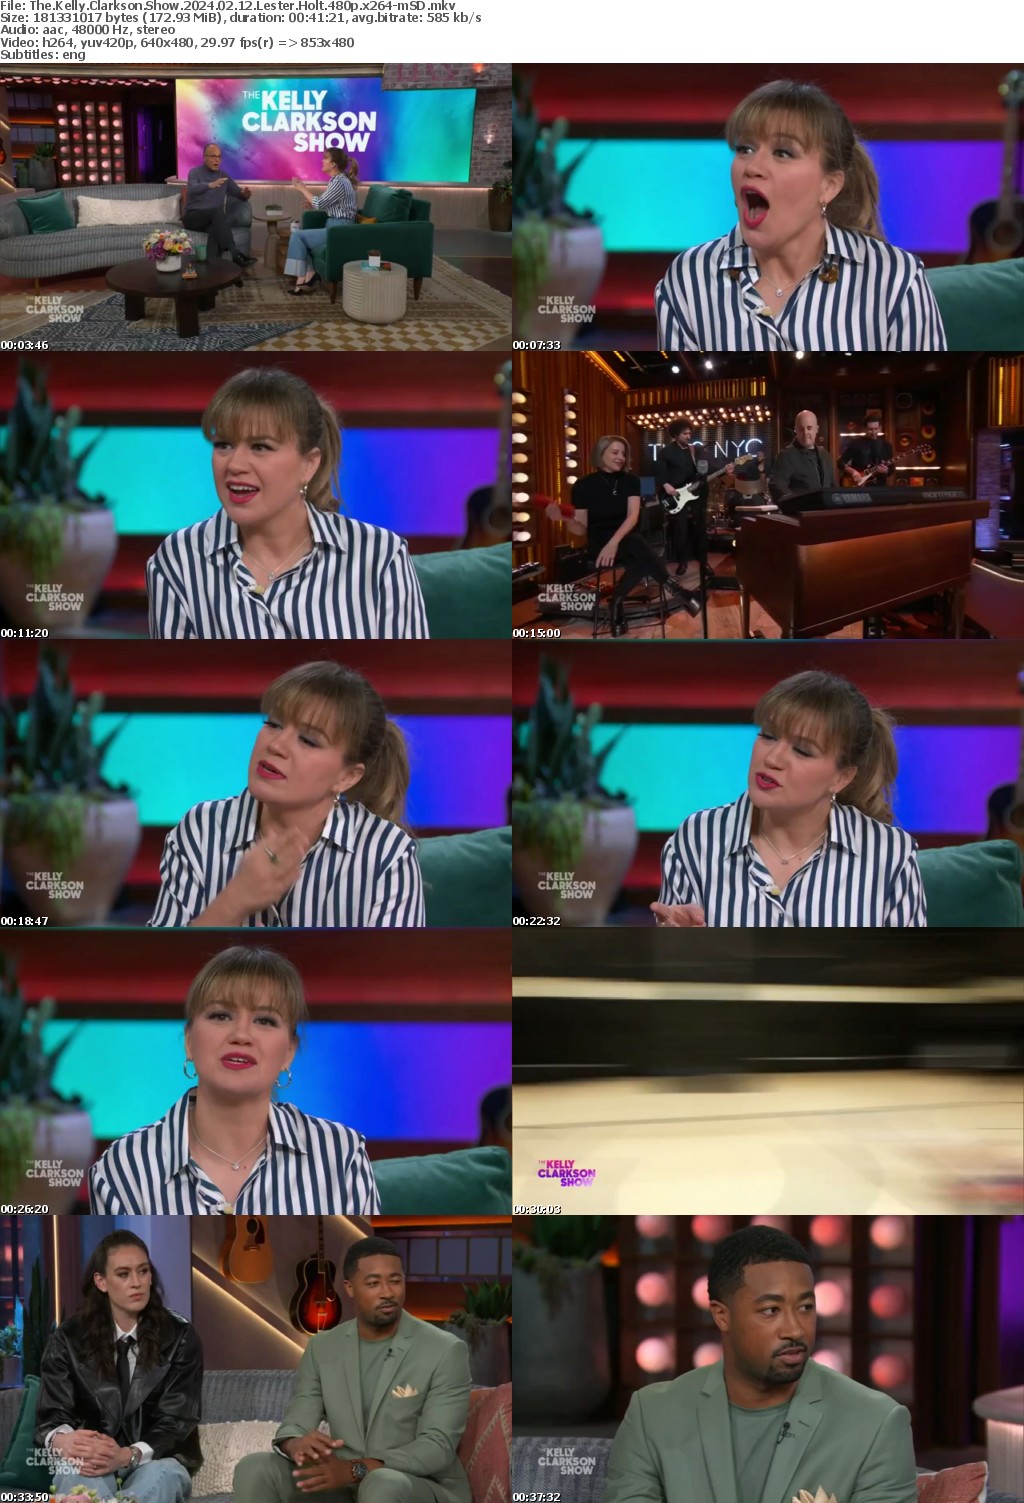 The Kelly Clarkson Show 2024 02 12 Lester Holt 480p x264-mSD